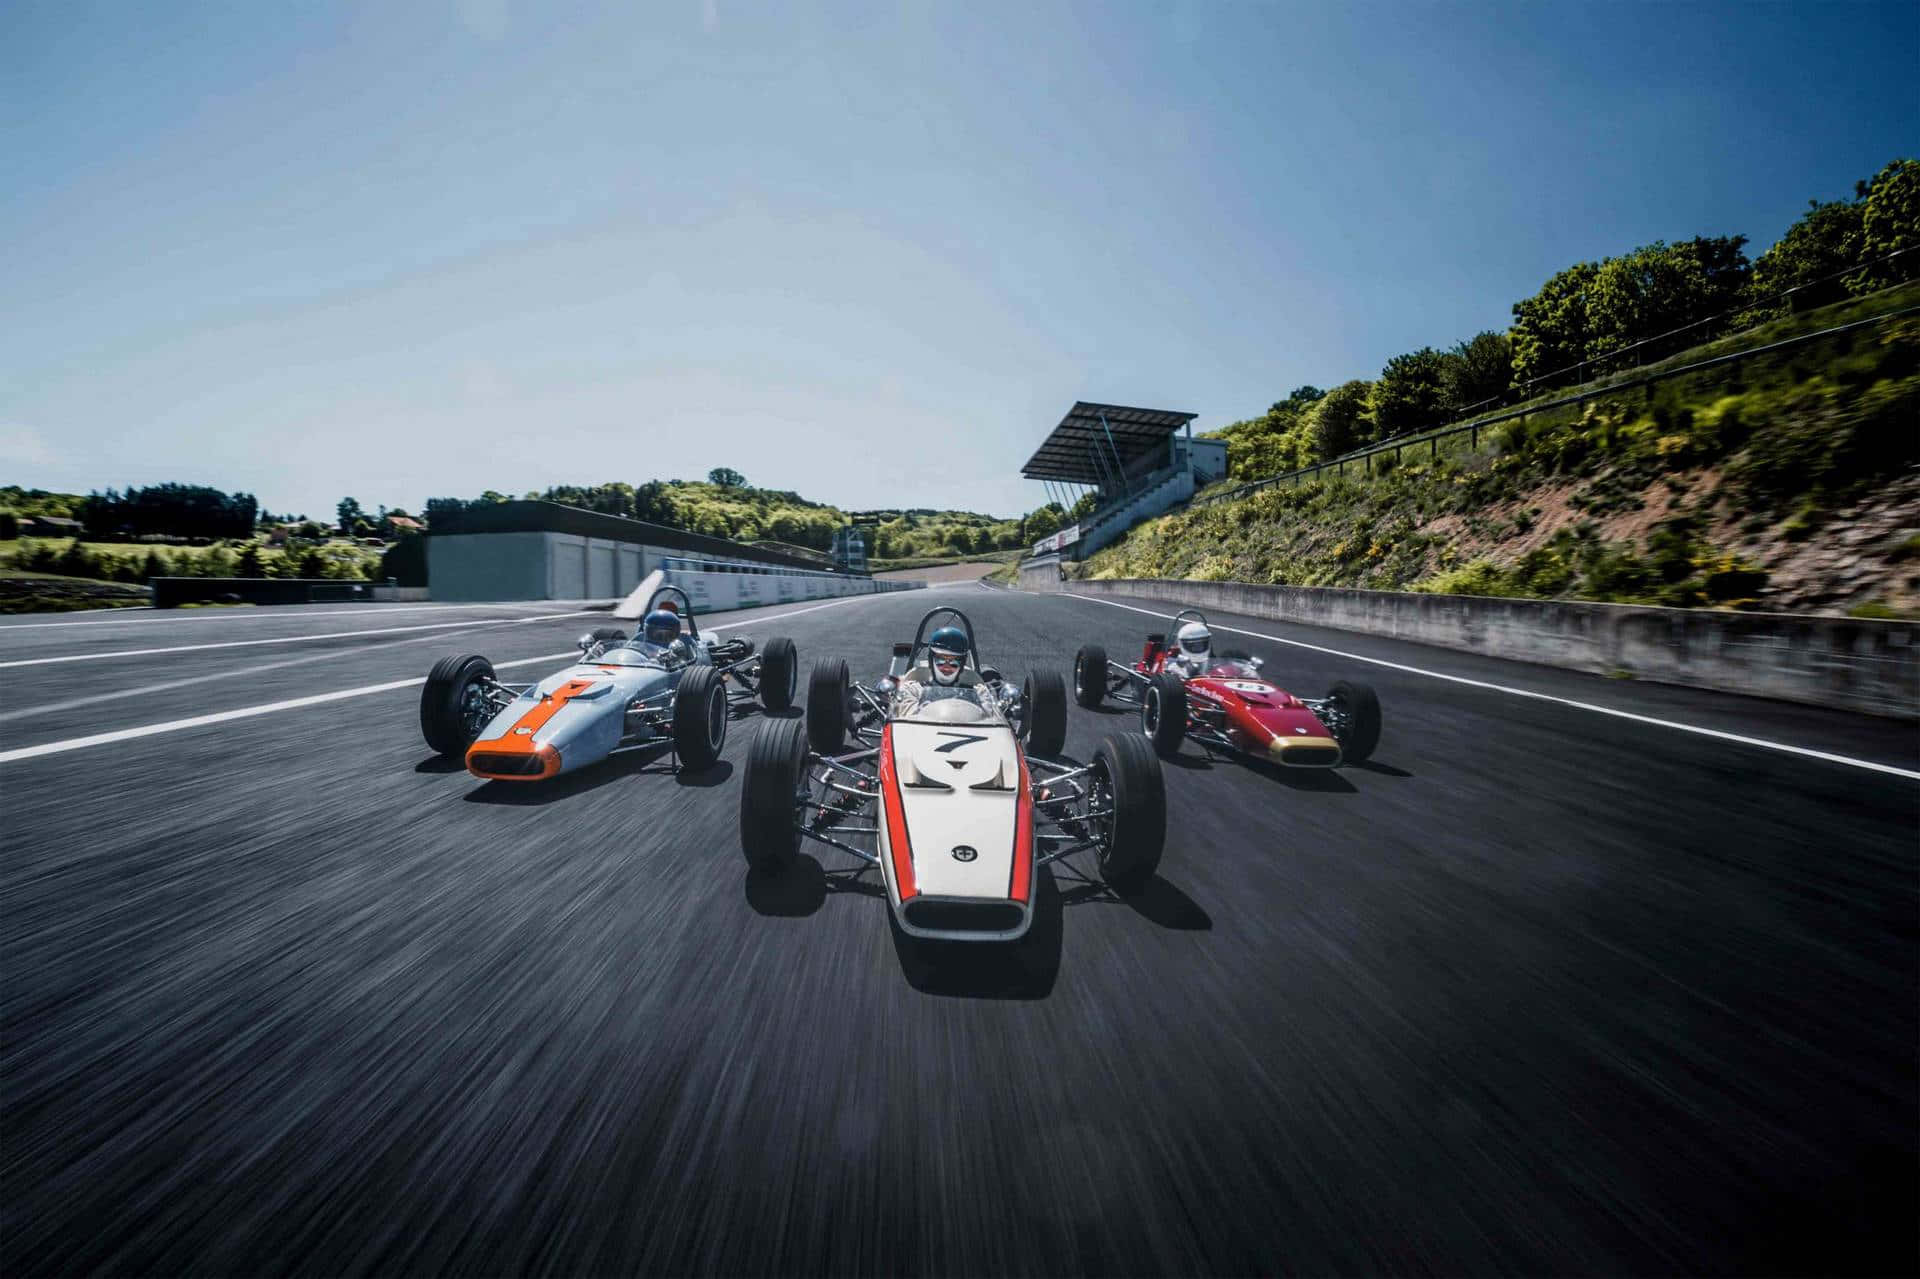 A Group Of Racing Cars On A Track